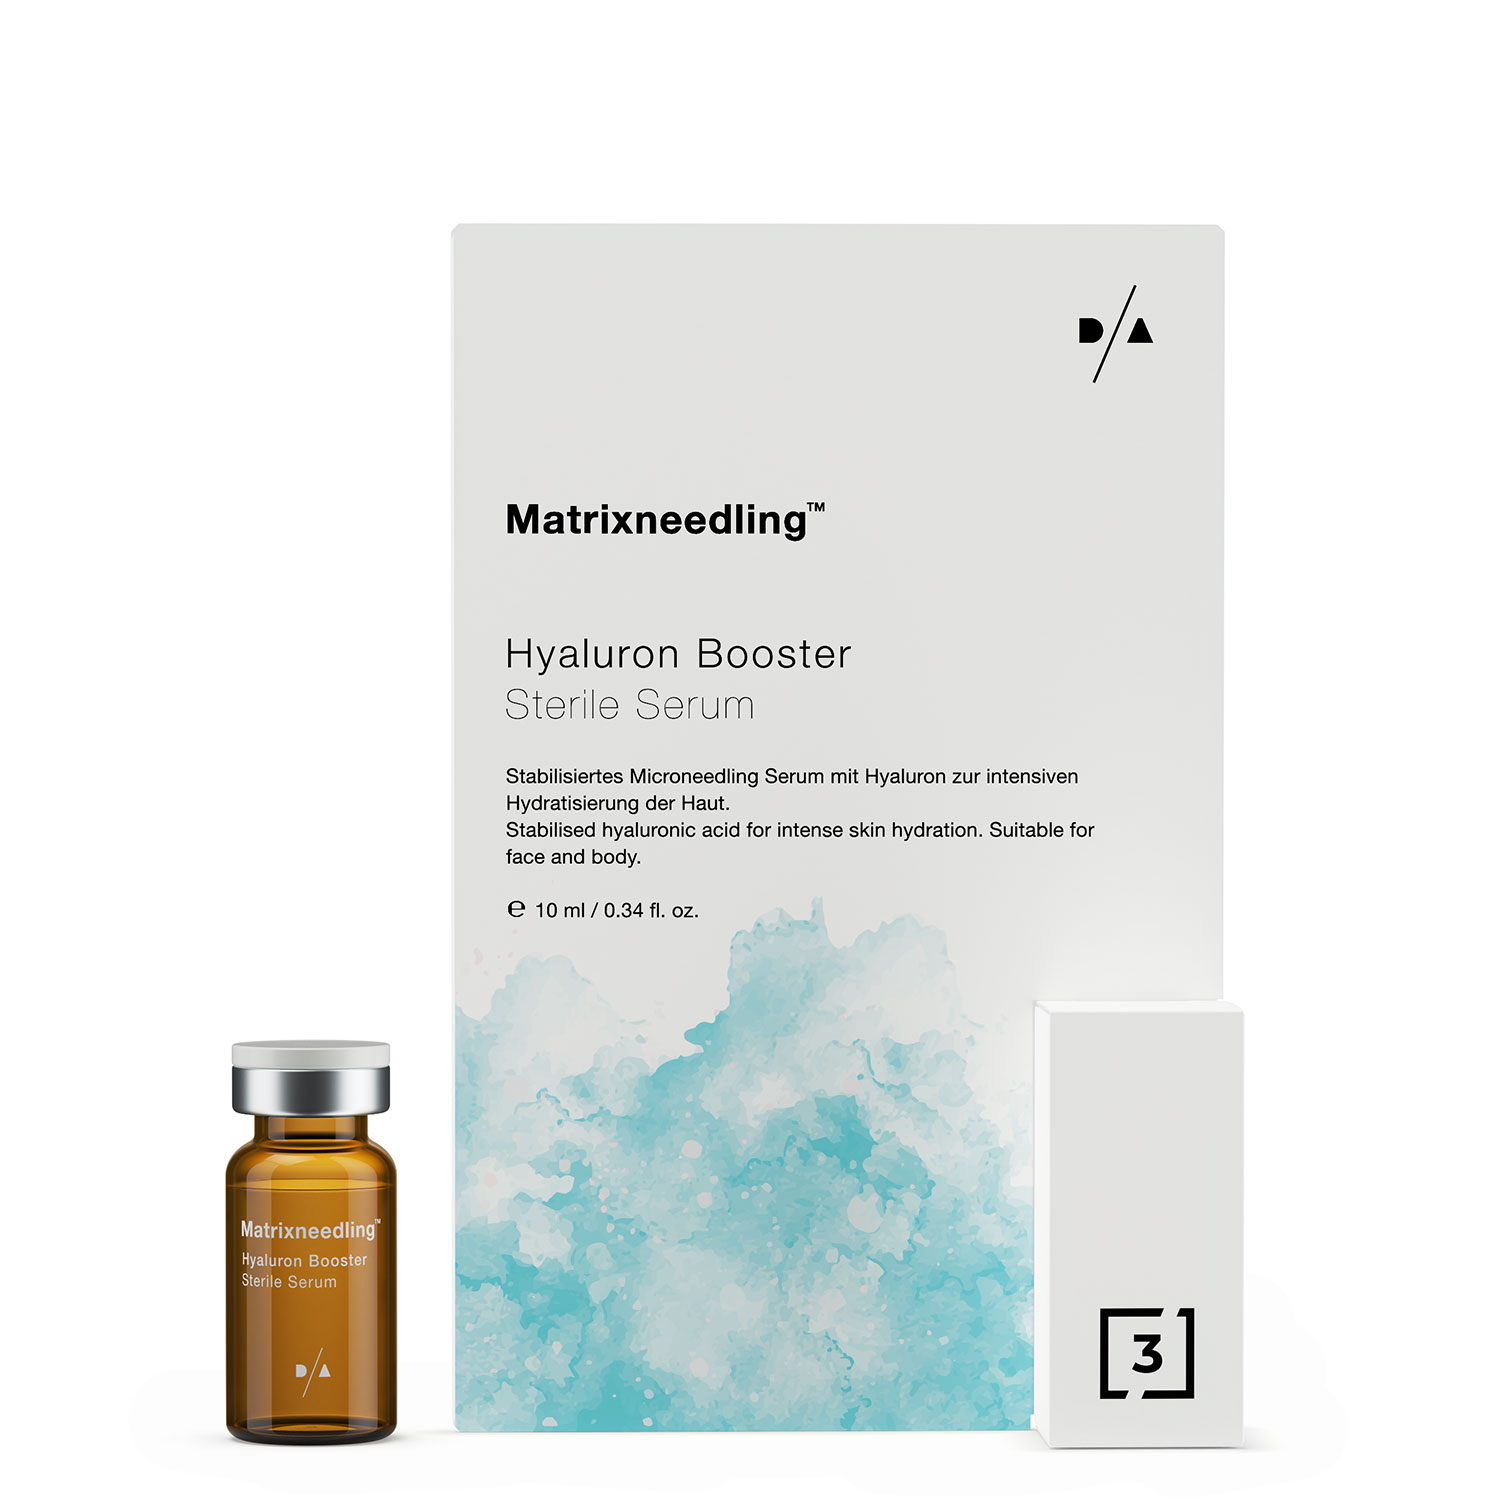 Hyaluronic booster